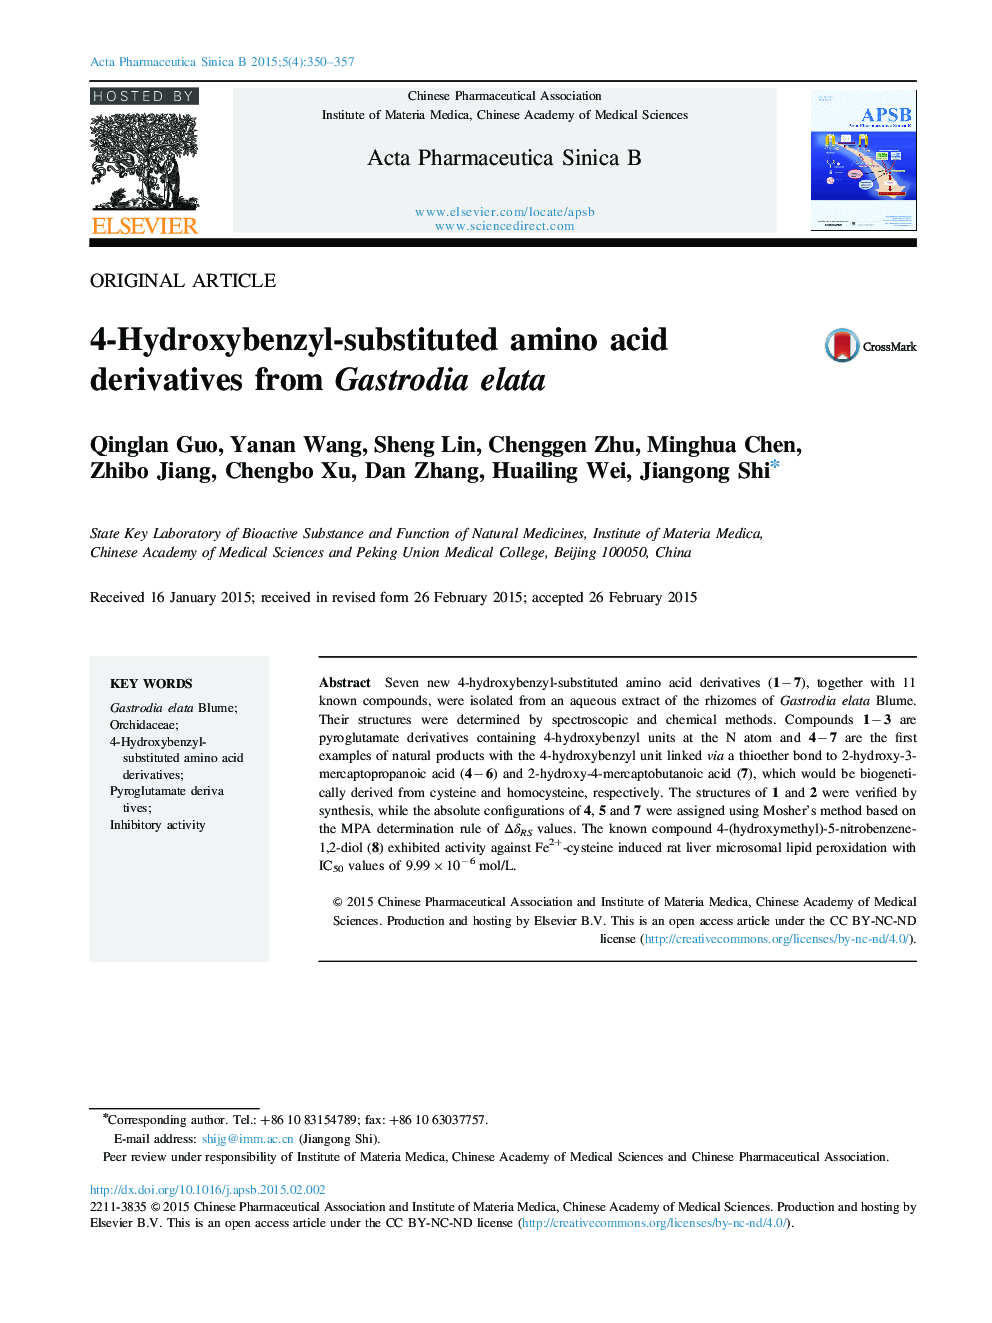 4-Hydroxybenzyl-substituted amino acid derivatives from Gastrodia elata 